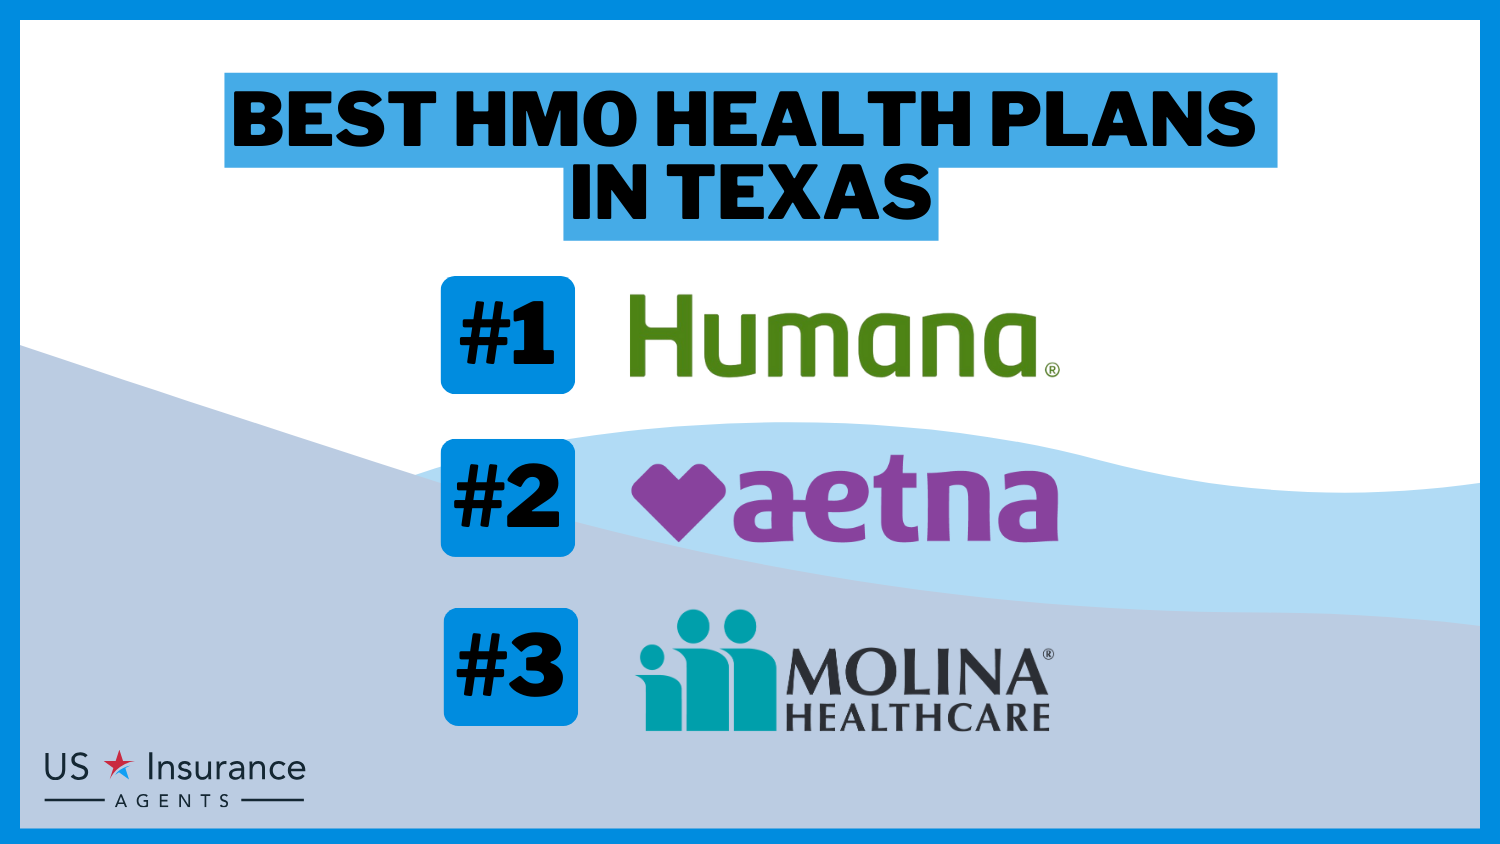 Best HMO Health Plans In Texas